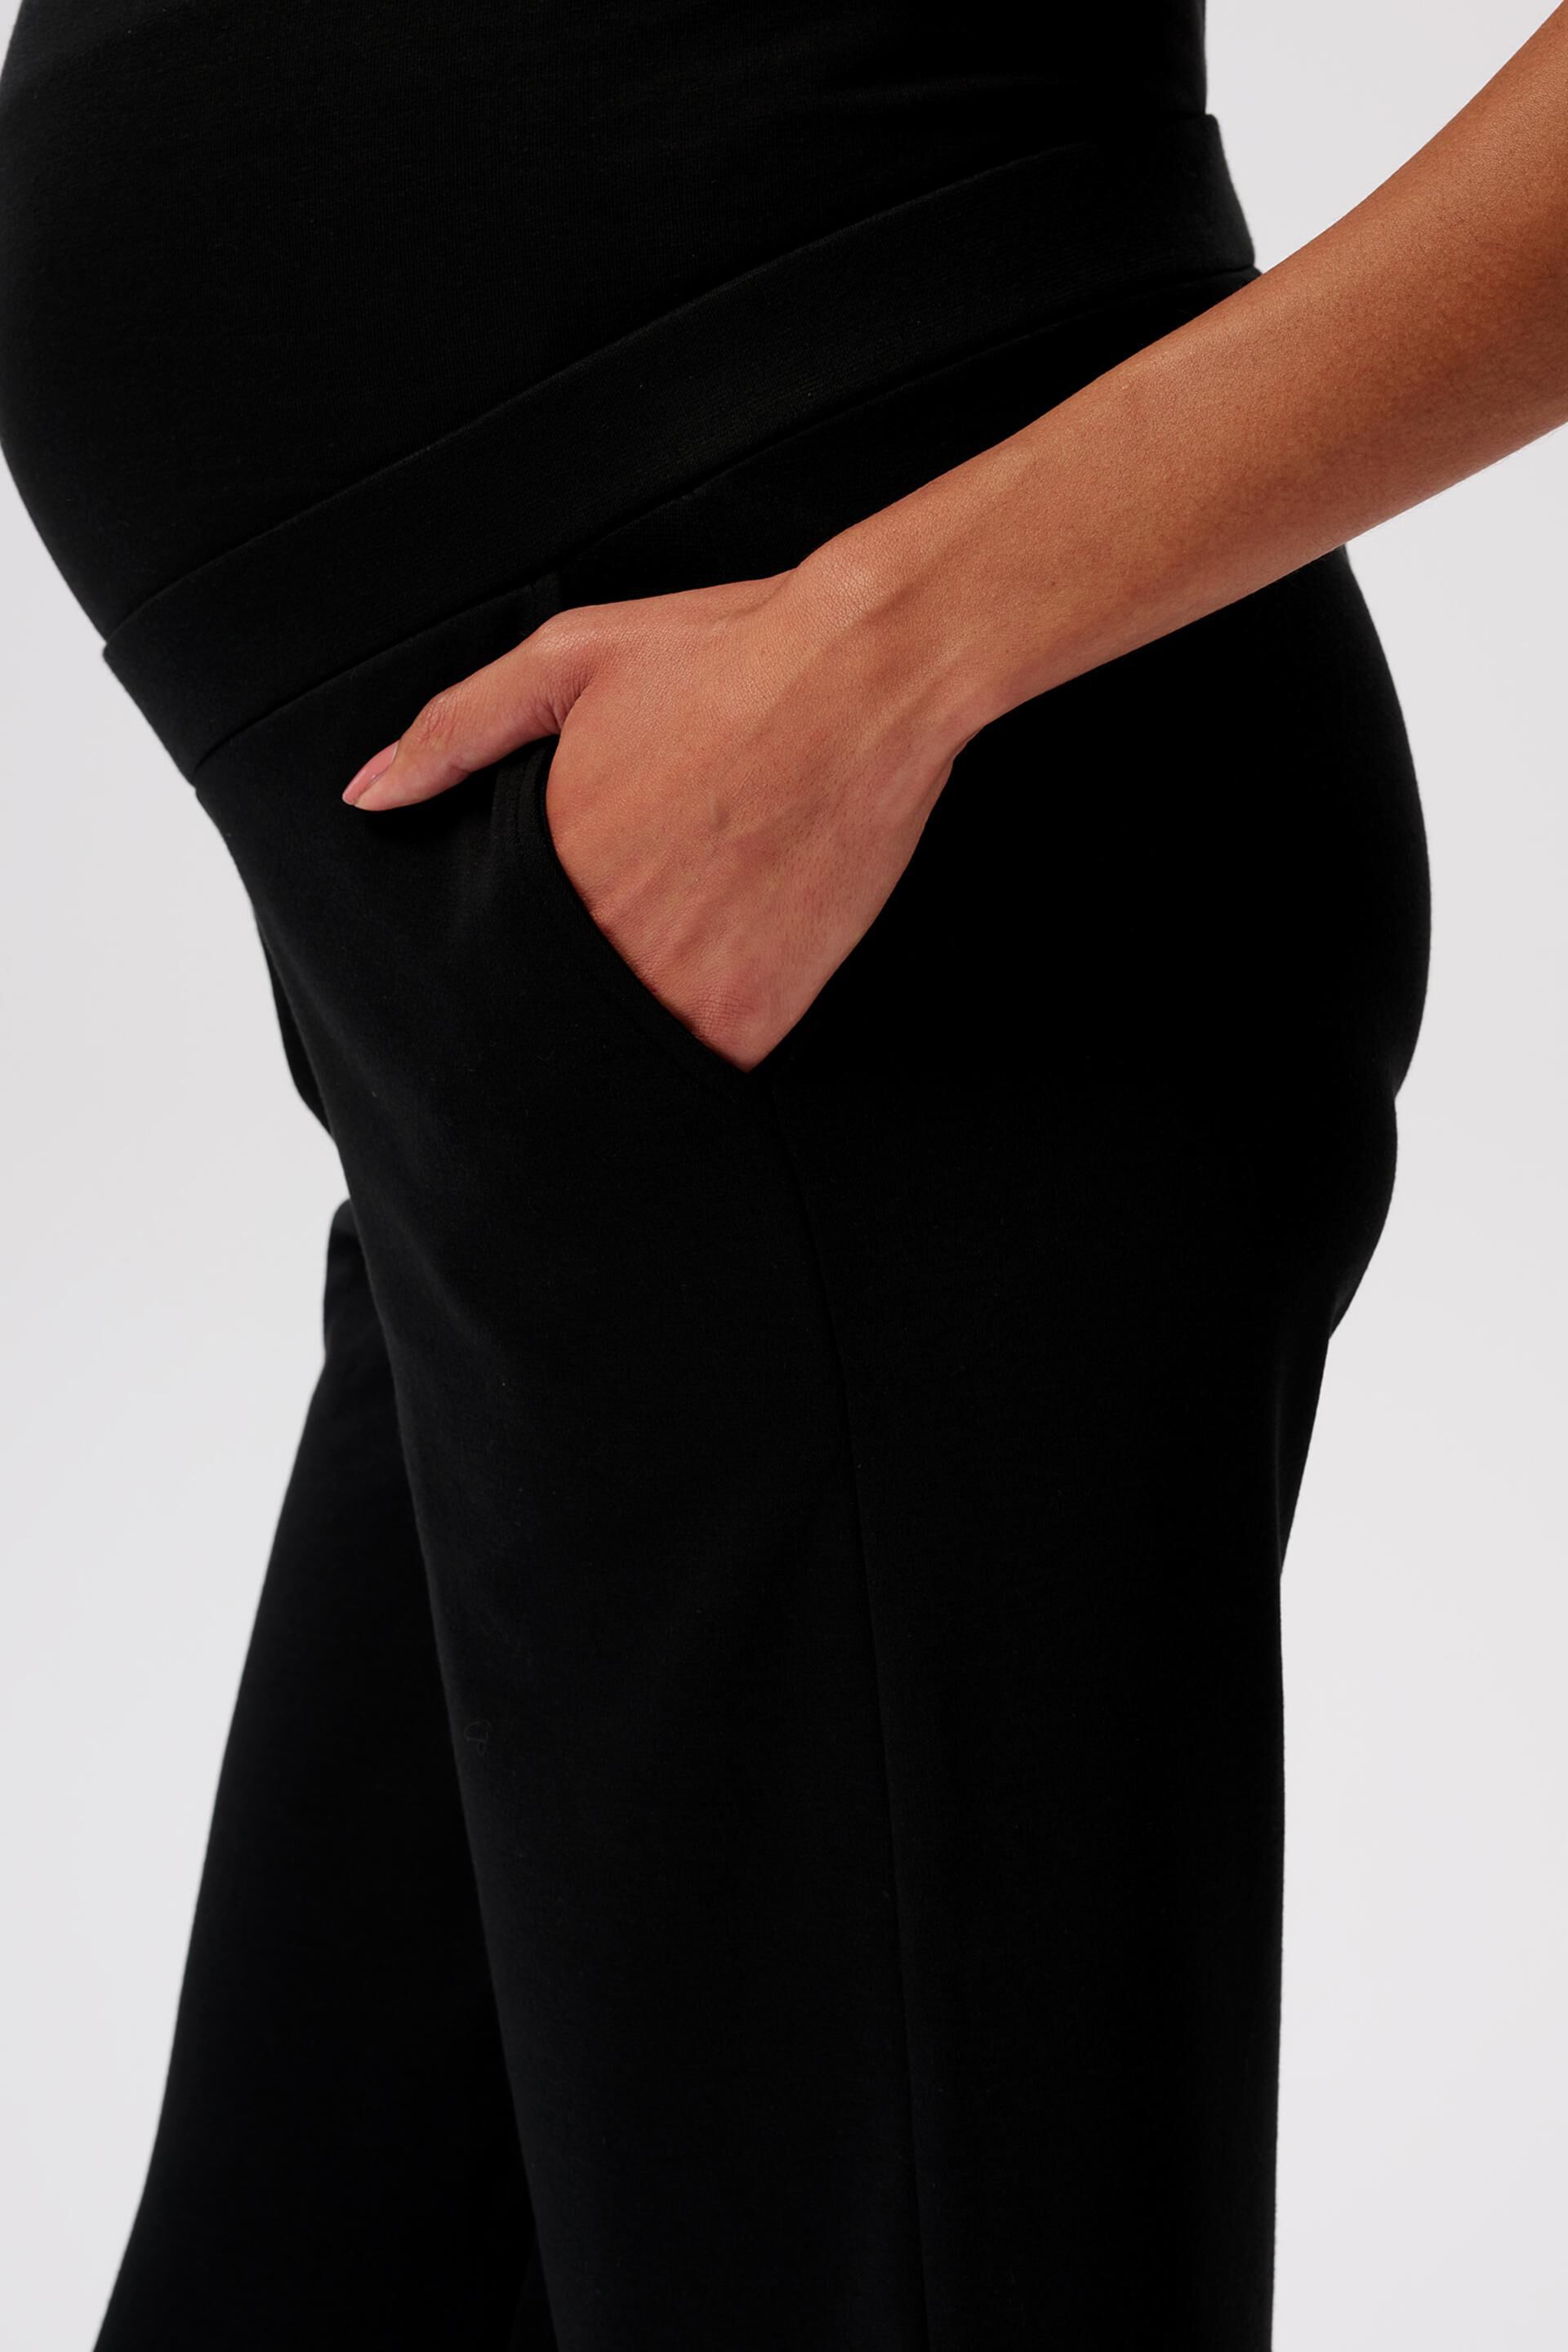 Purpless Maternity Pregnancy Trousers Under and Over Bump Joggers for  Pregnant Women 1321 (8, Black) : Amazon.co.uk: Fashion